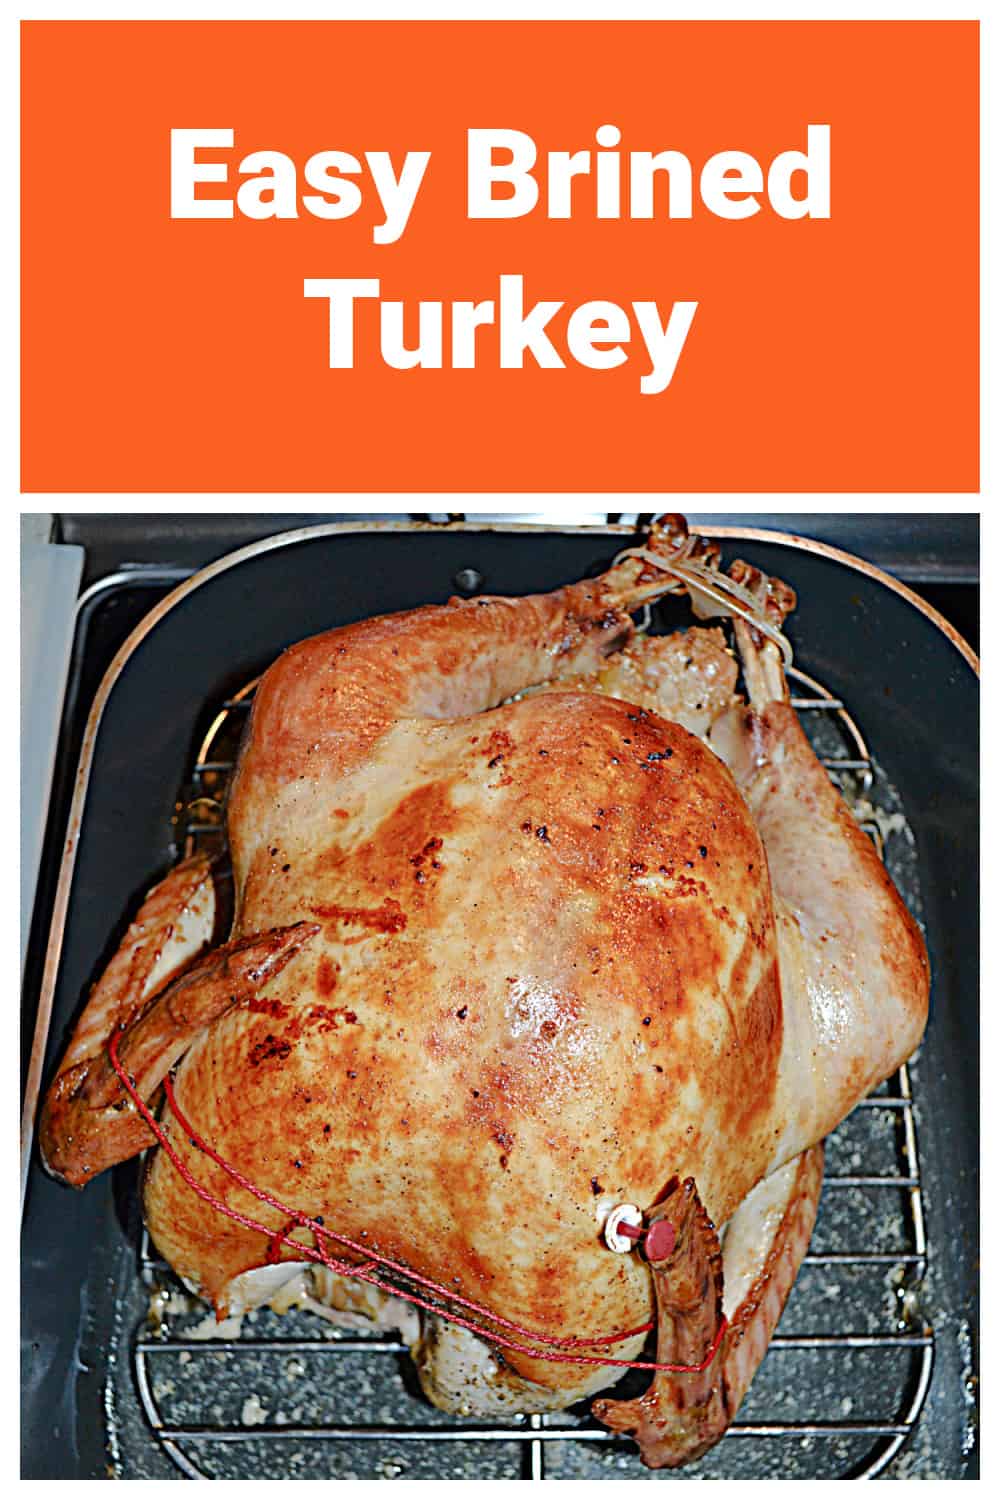 Pin Image: Text title, a golden brown turkey in a roaster.